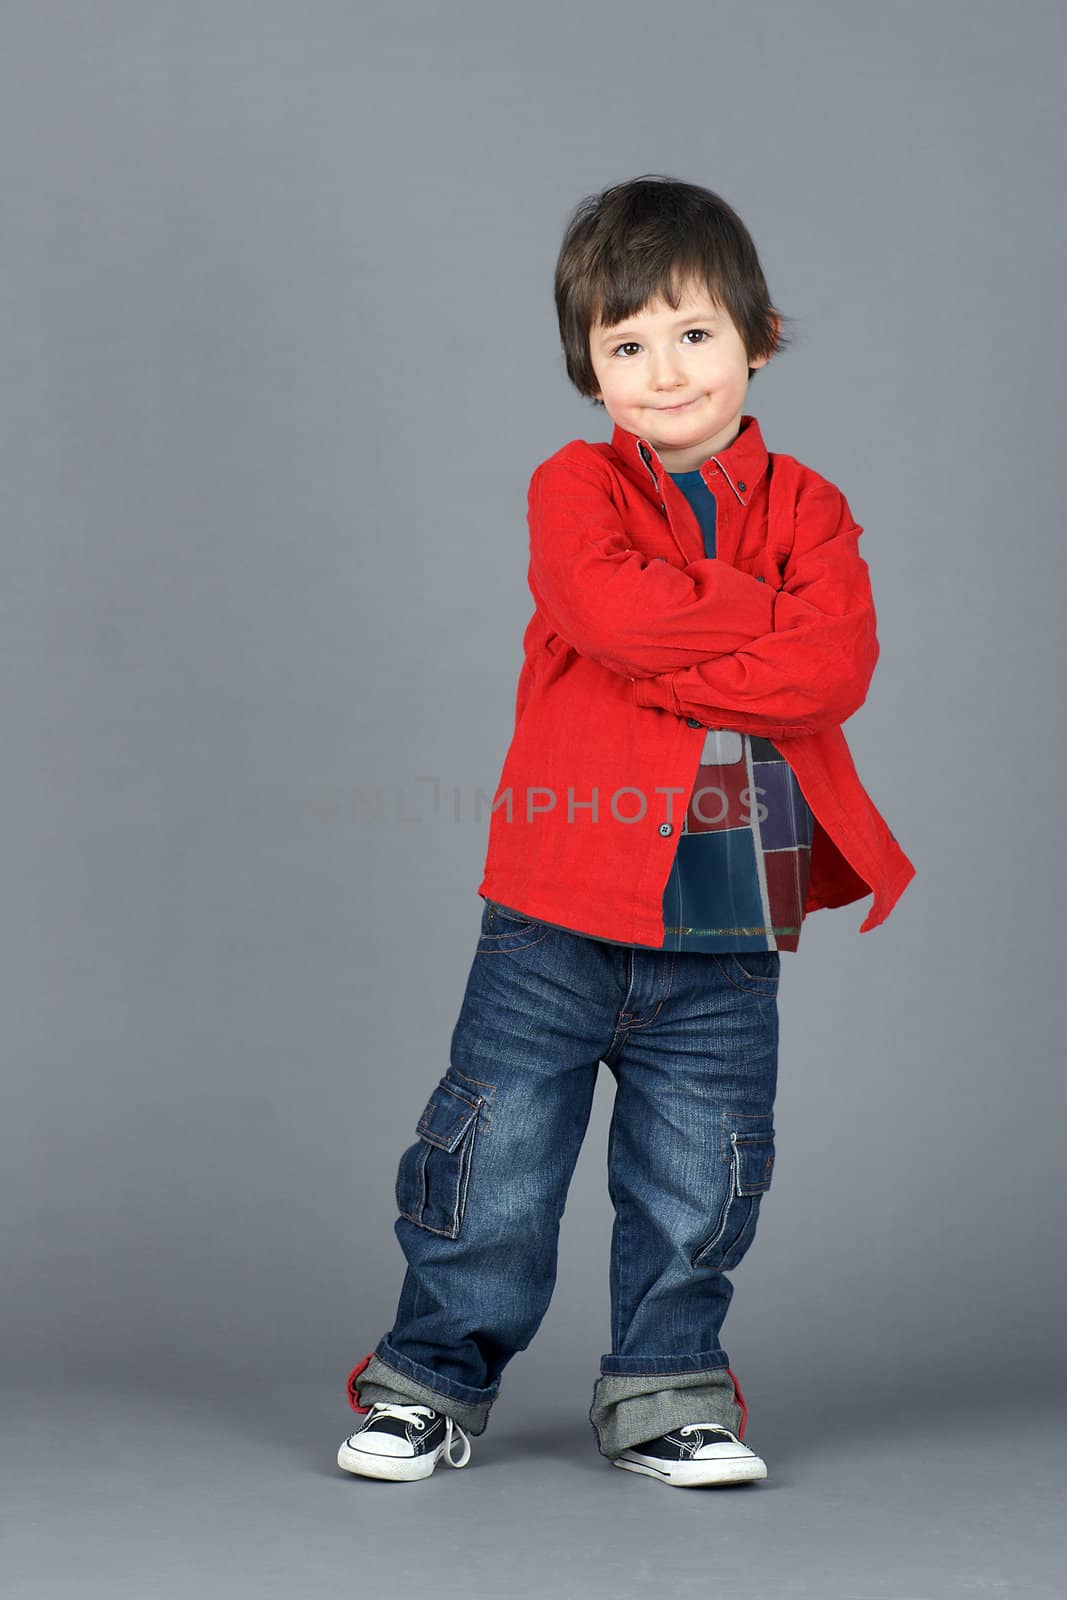 Super cute young or little boy smiling dressed in cool red corduroy shirt and jeans, leaning on one side, shot in studio  over grey background.